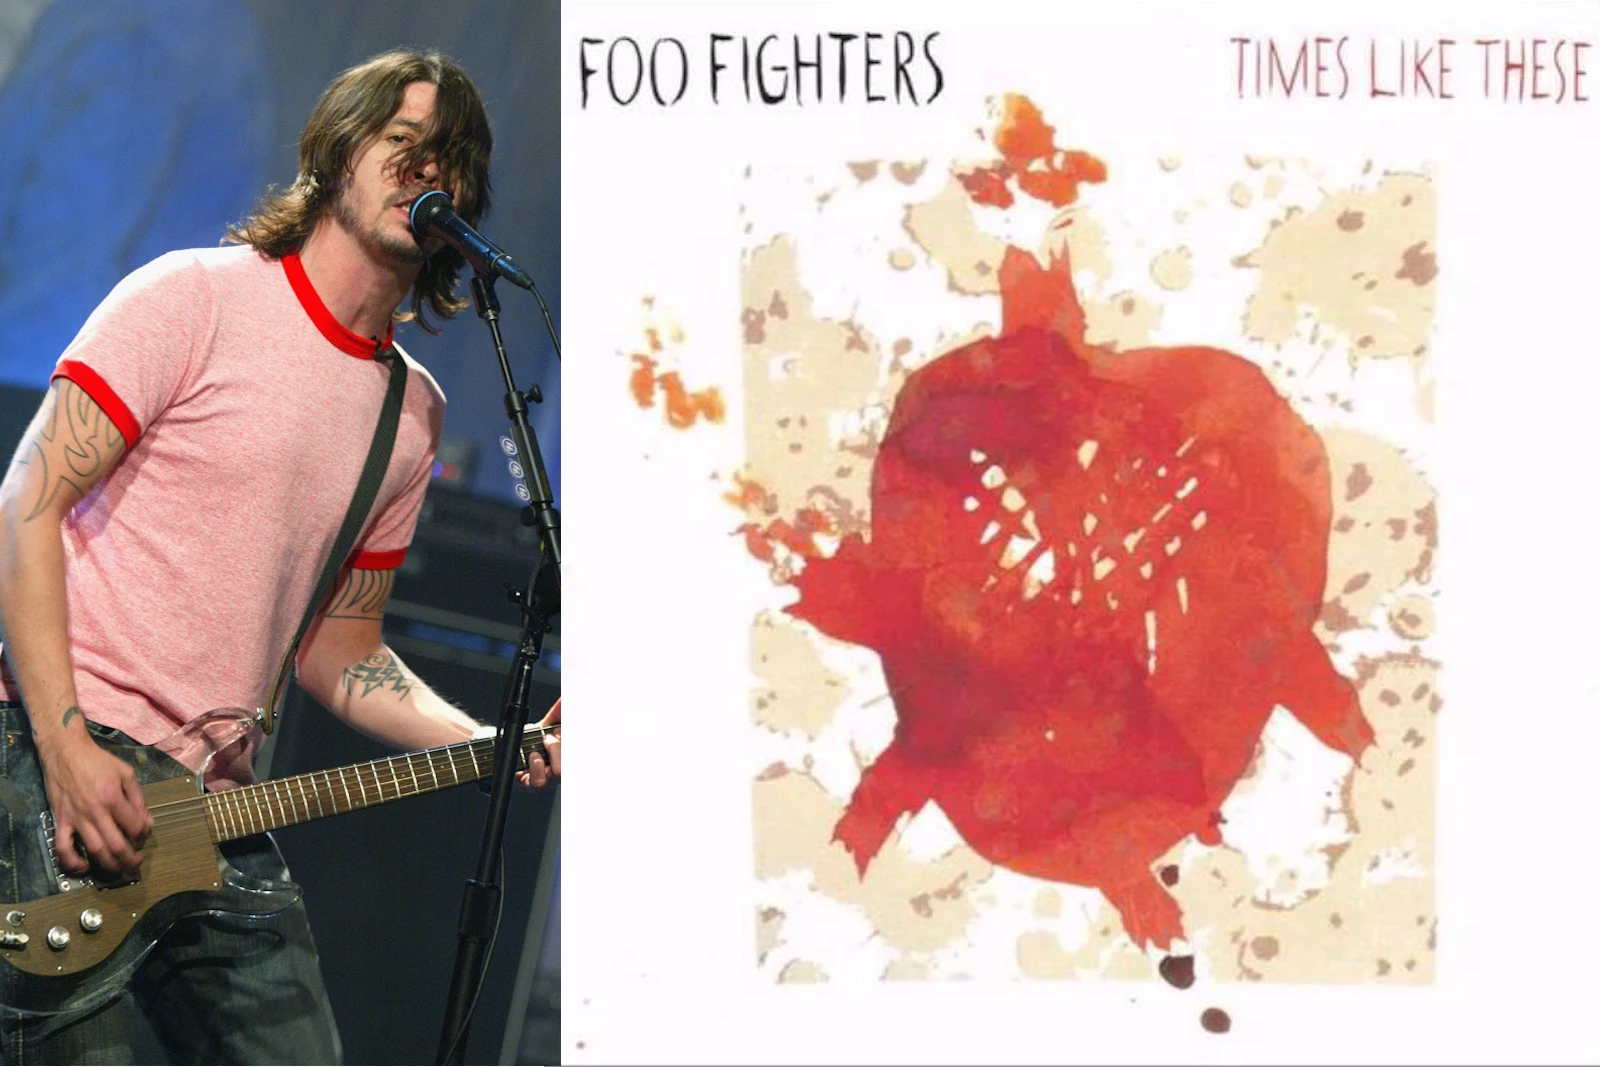 Why ‘Times Like These’ Could Have Marked the End of Foo Fighters